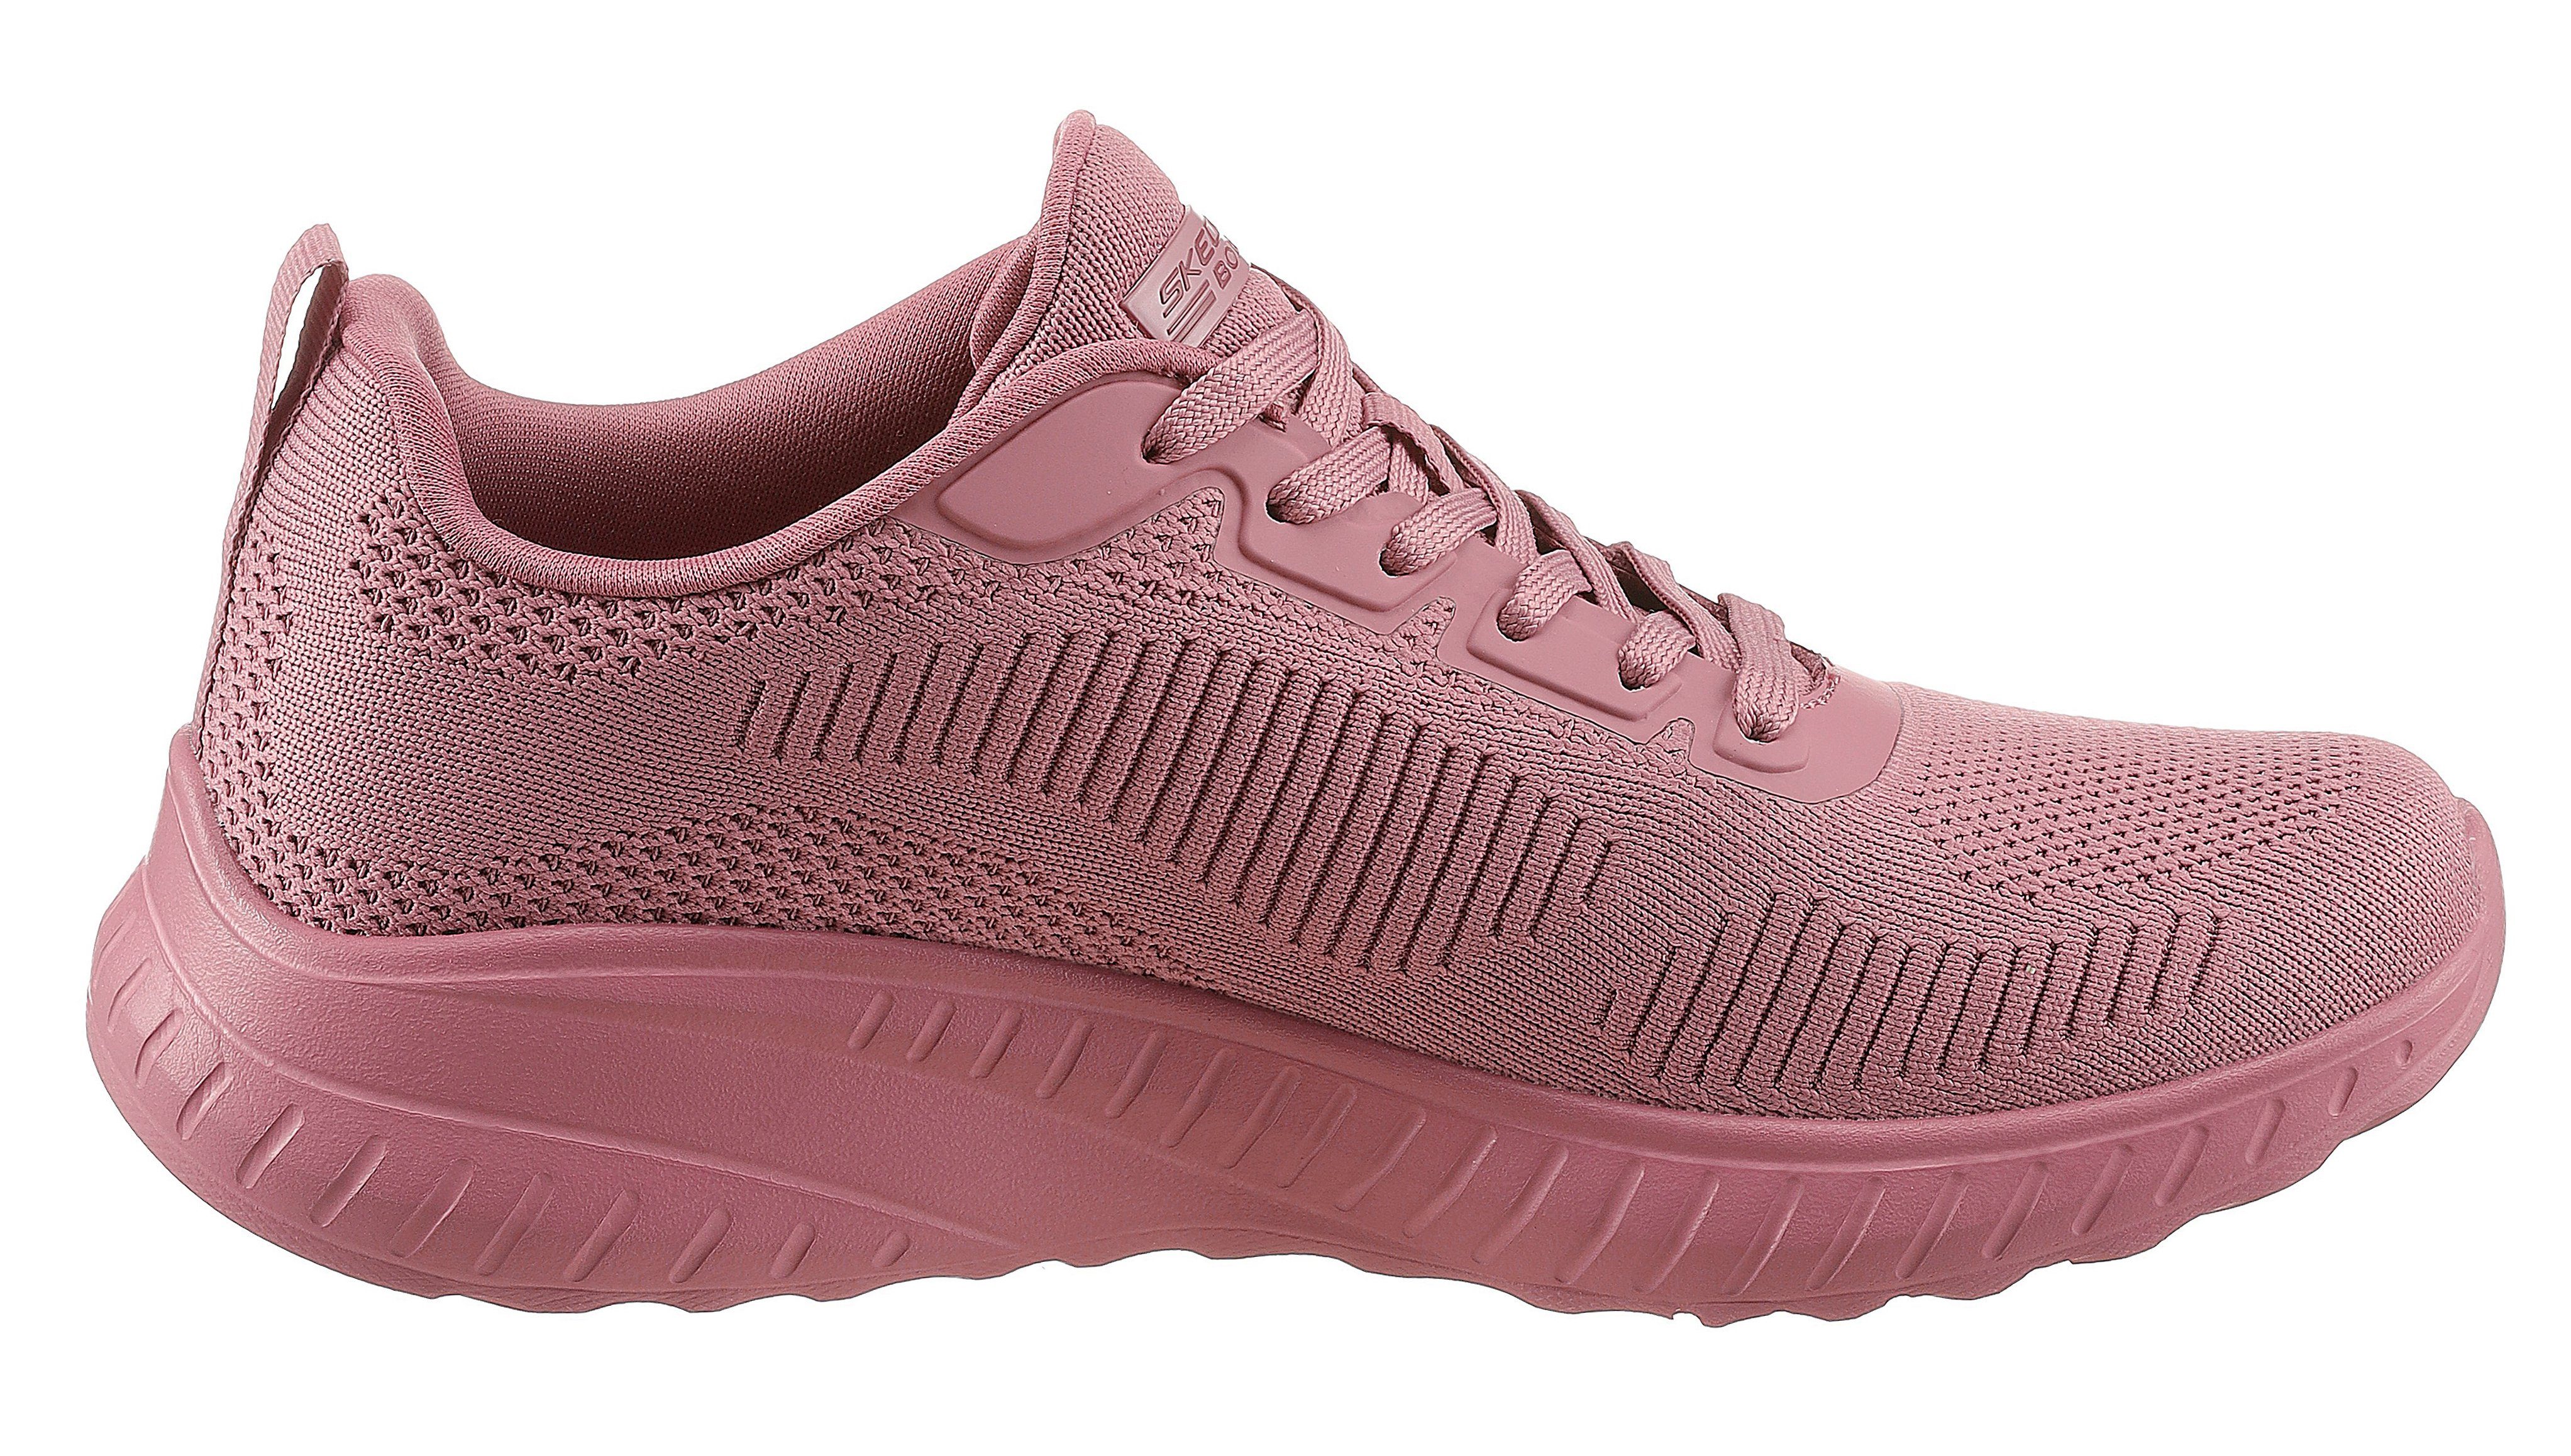 Sneaker OFF himbeere Skechers SQUAD BOBS FACE mit Innensohle CHAOS komfortabler